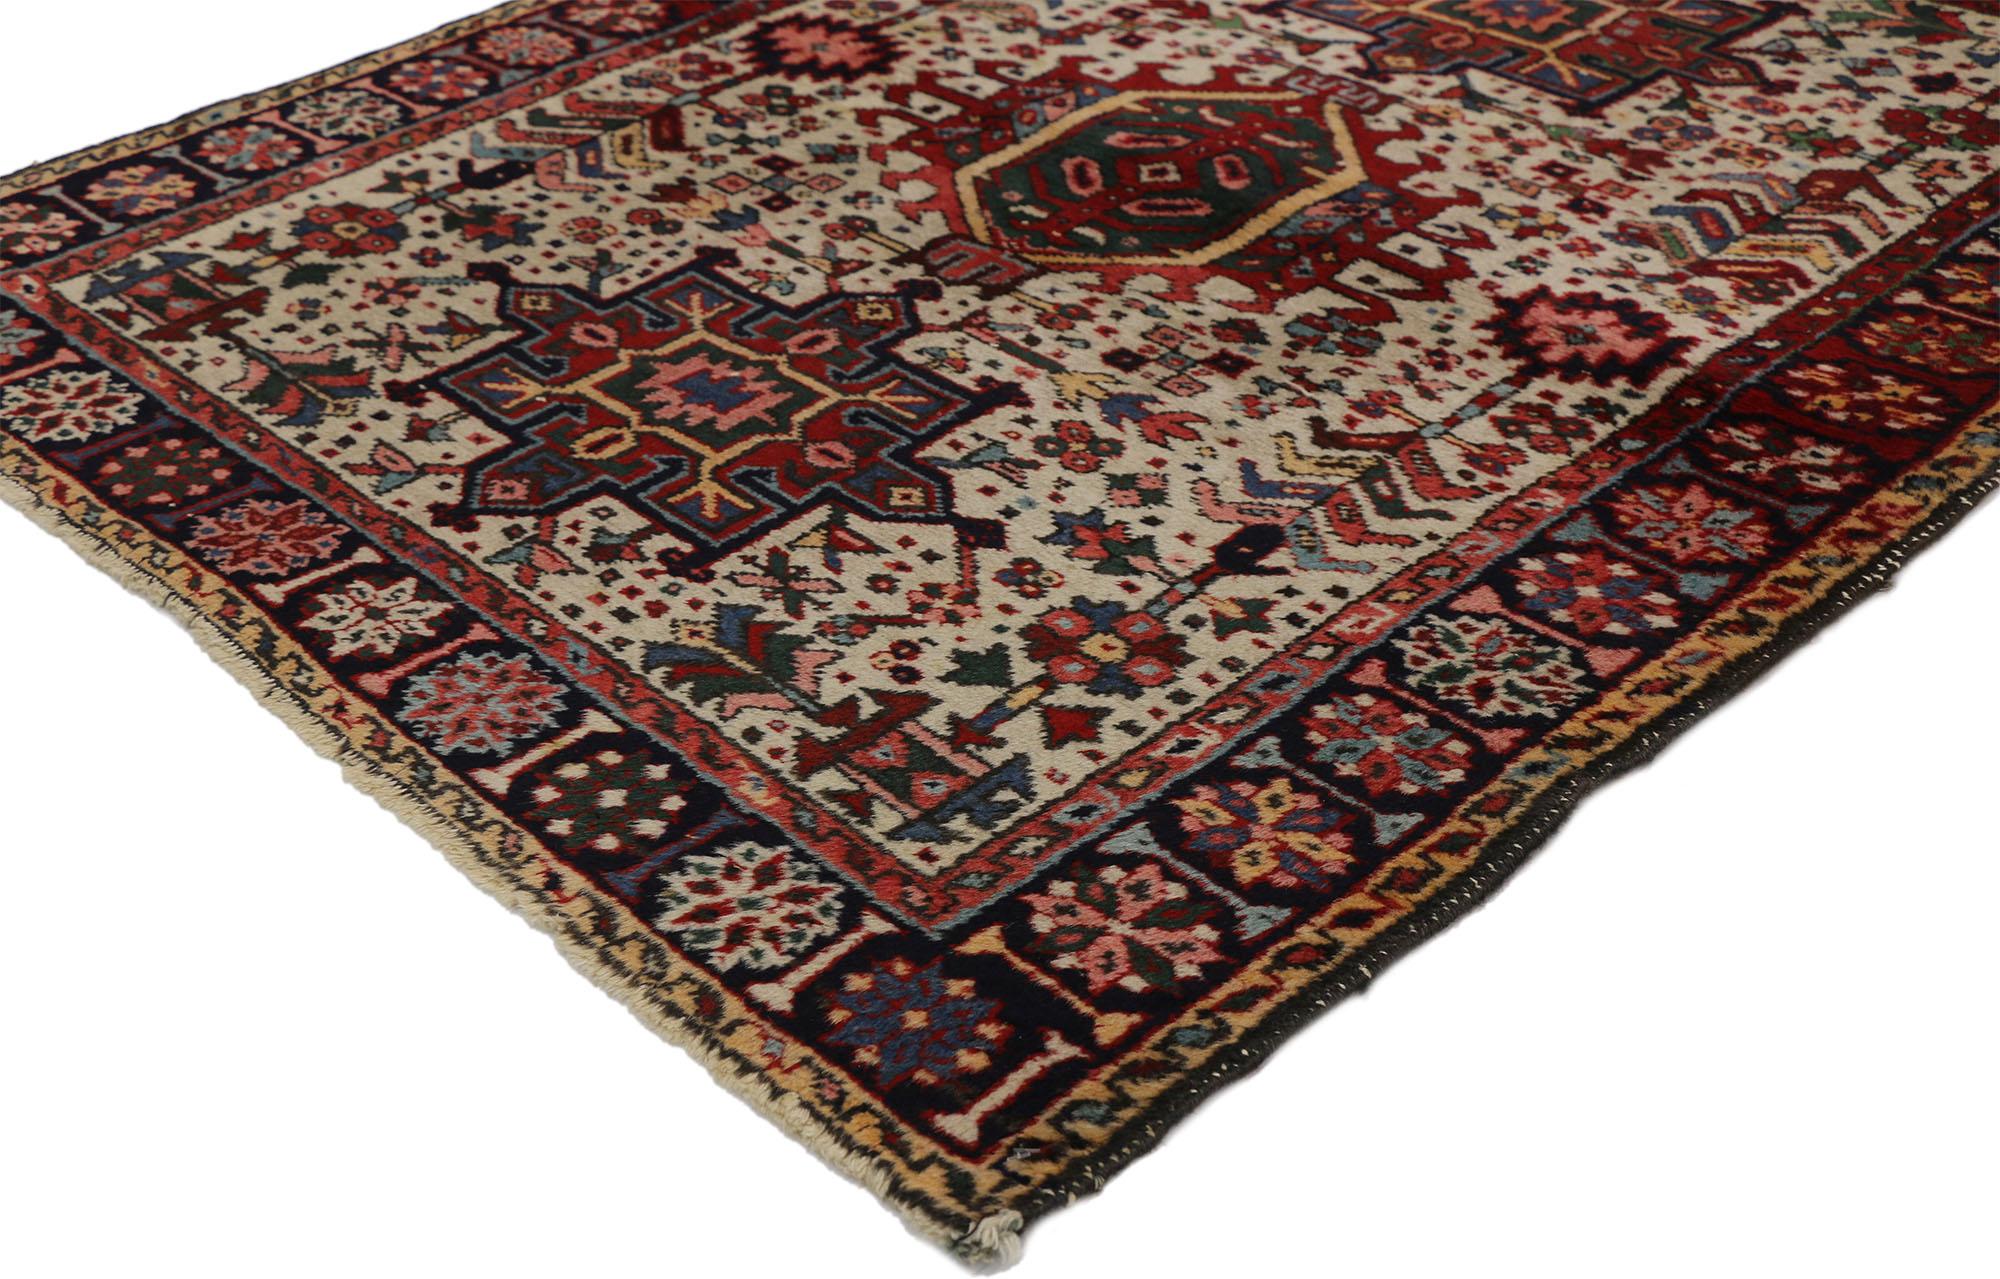 73300 Antique Persian Heriz Karaja Rug with Mid-Century Modern Style, Accent Rug 03'08 x 04'06. This hand-knotted wool antique Persian Heriz Karaja rug features three amulet medallions and a densely populated field with a dazzling array of patterns